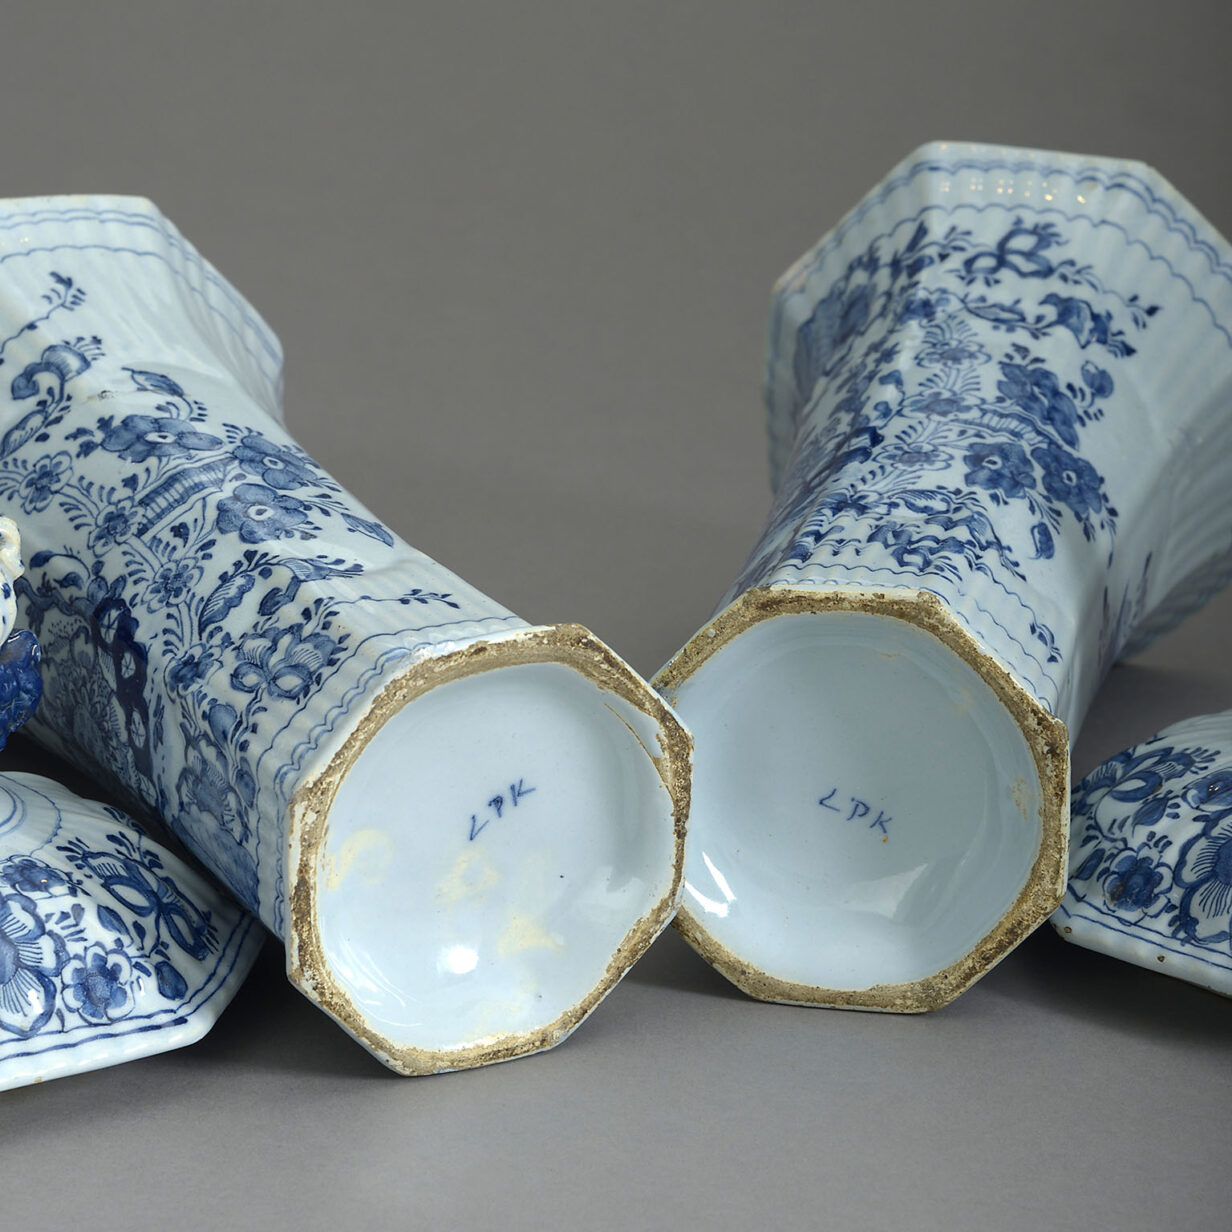 Pair of blue and white delft vases